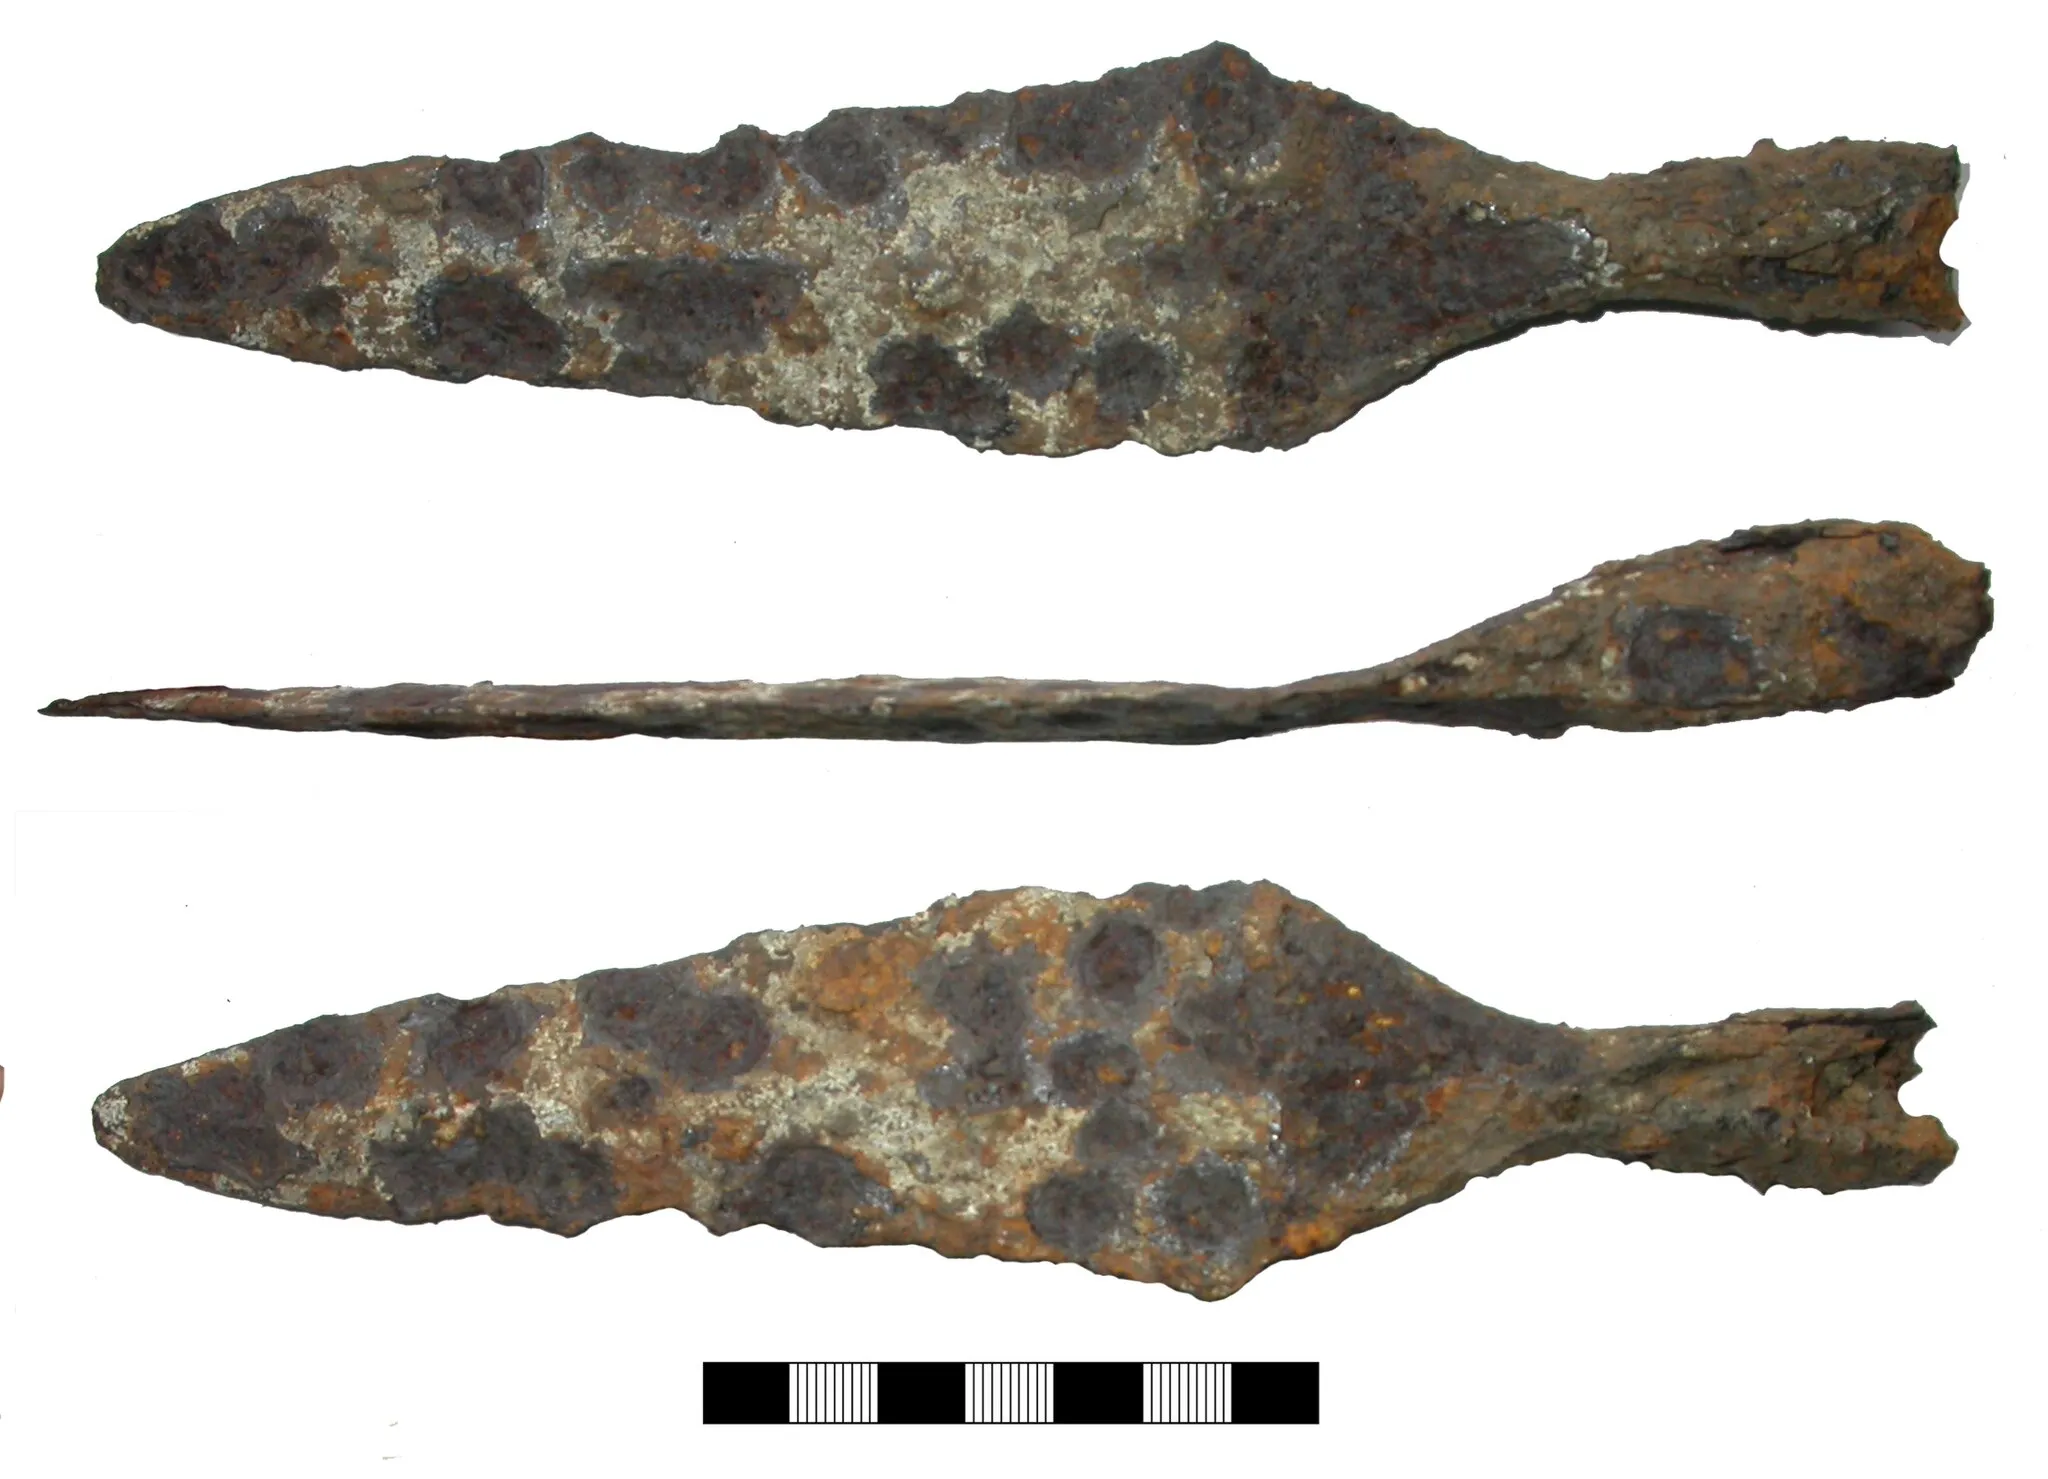 Photo showing: An iron spearhead of Early Anglo-Saxon date. Kevin Leahy comments: "With its open socket and an angled blade which is disproportionally longer than the socket this spear fits into Swanton (1973) Group E1. Swanton feels this Group is early and didn't find any that could be dated as late as the sixth century. I would be more cautious and say fifth-early sixth century."
The spear, which is now in poor condition, measures 210mm long and 46mm wide. In cross section the socket has two almost straight sides, the others being rounded. The spear is bent slightly form the base of the blade. The internal length of the socket is 19.28mm.